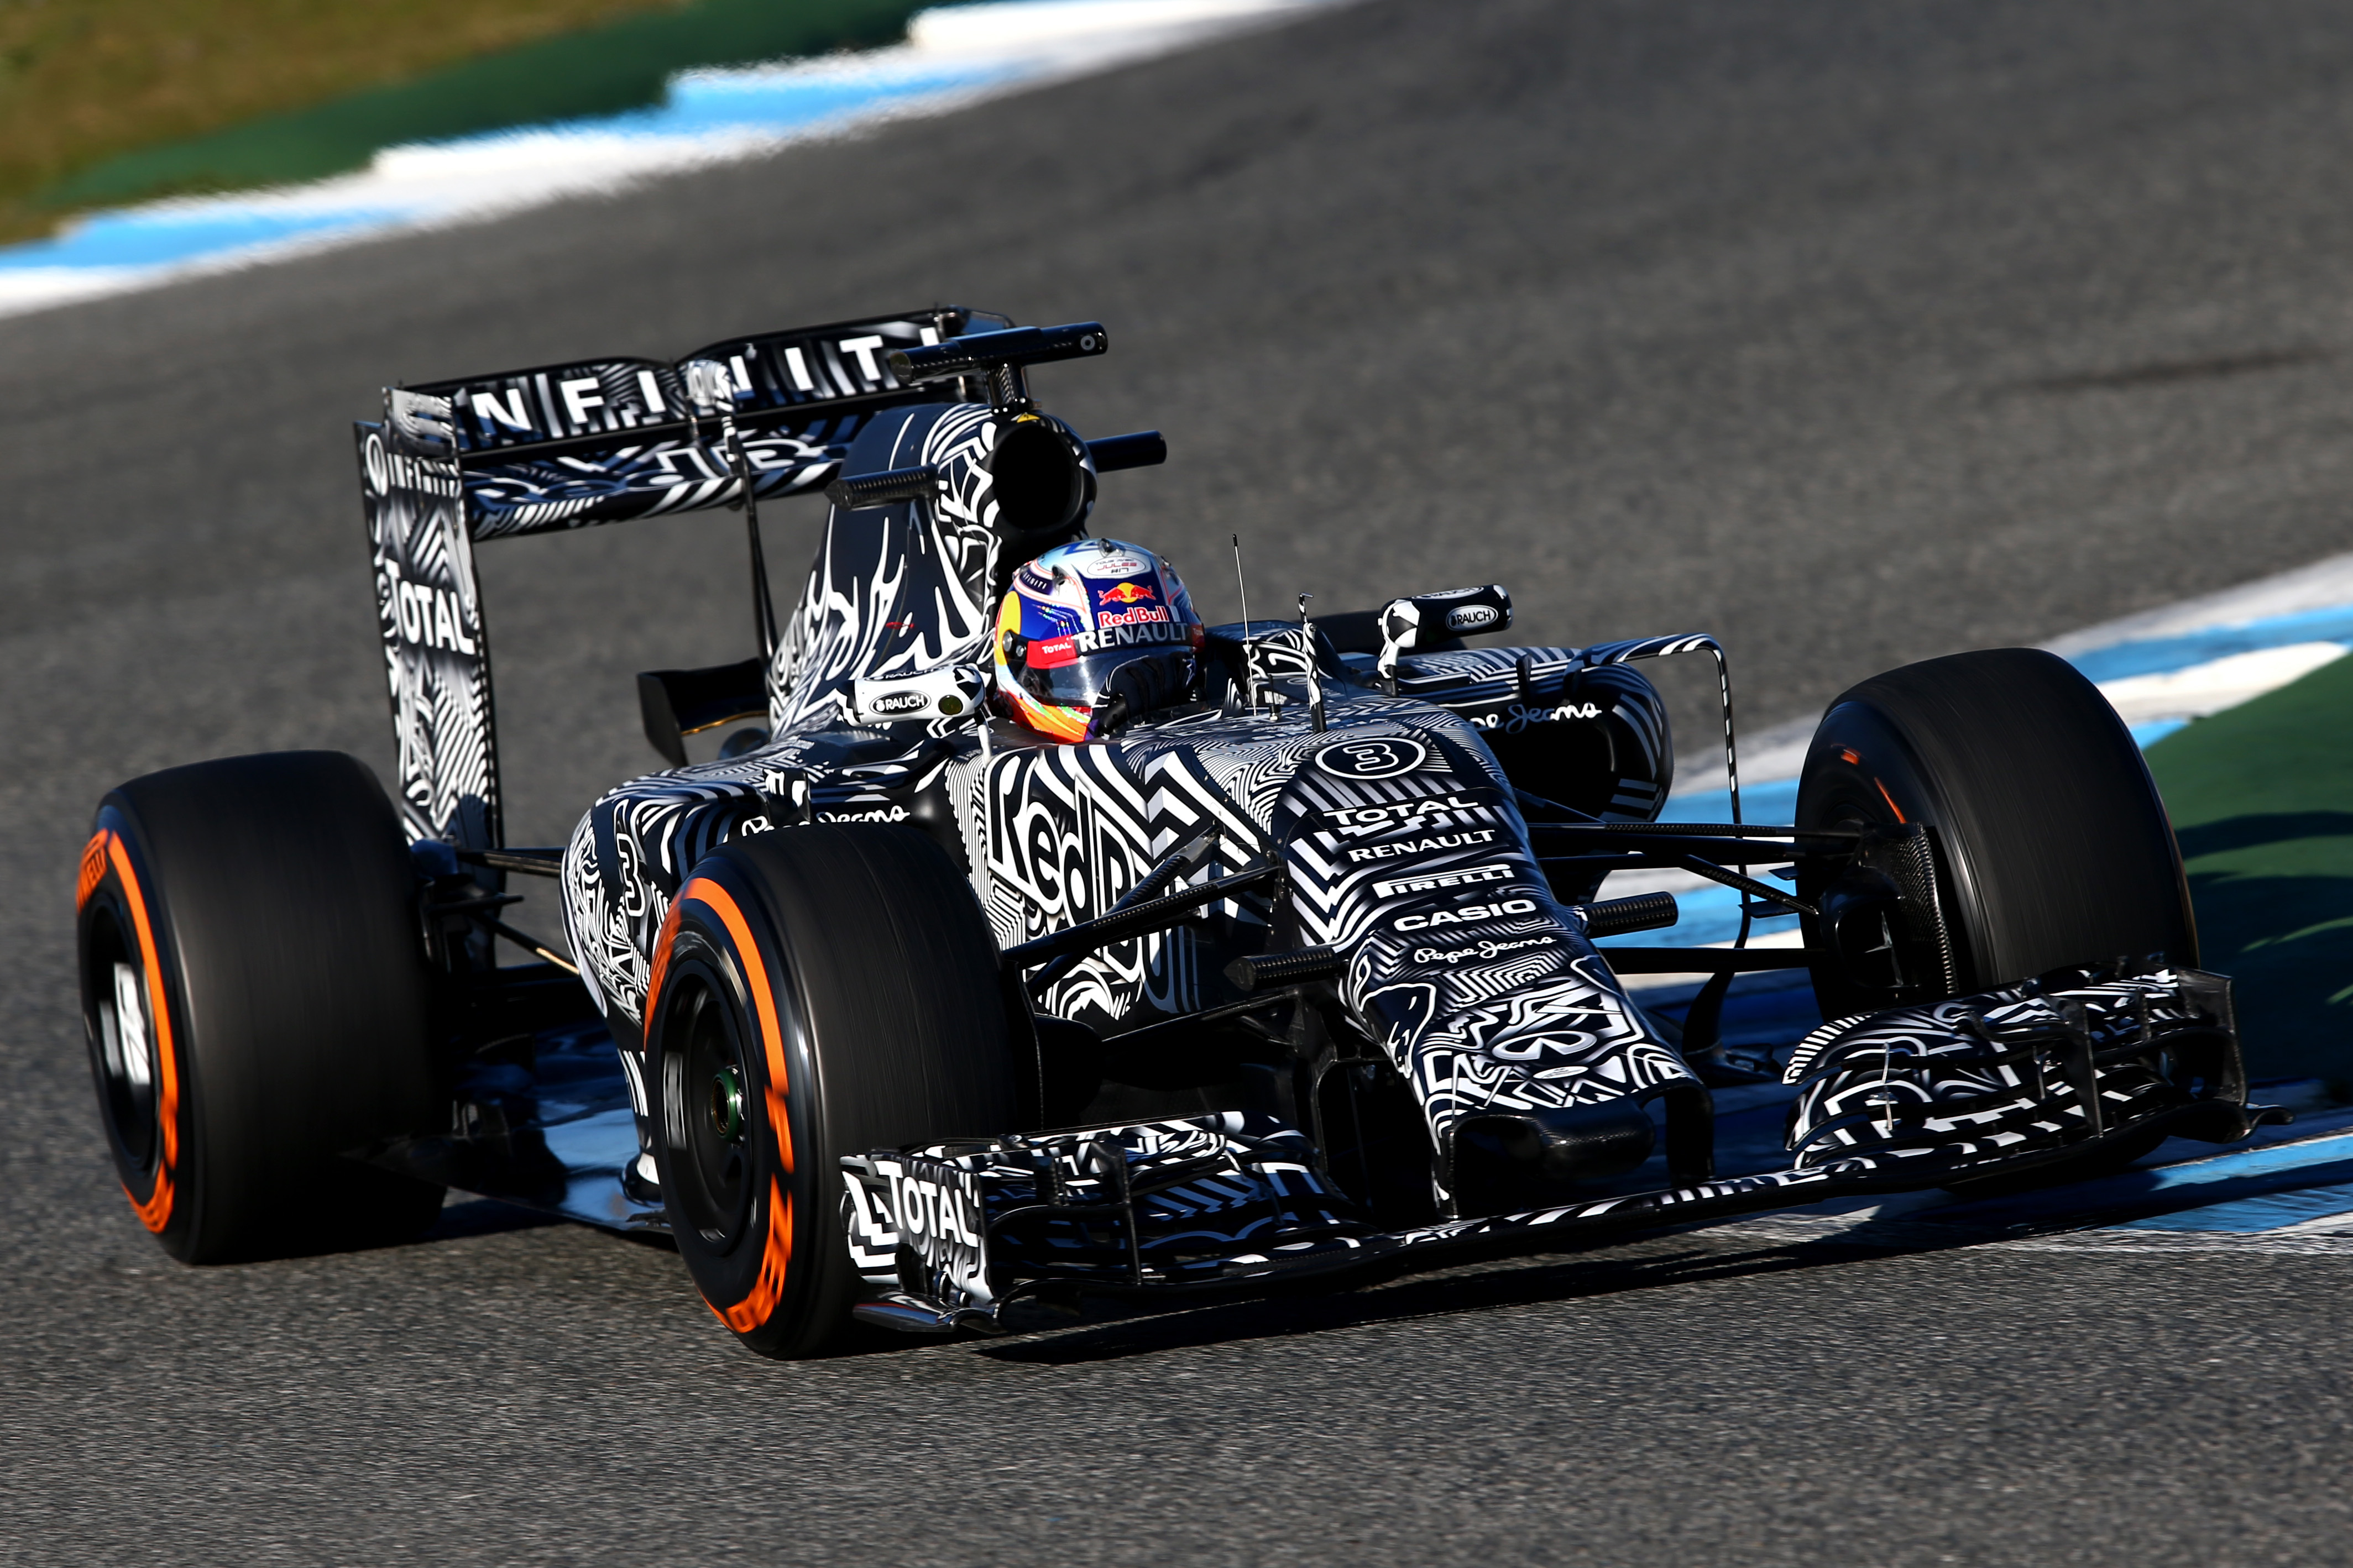 Red Bull Racing Confirm Unspecified Engine Deal In Place For 2016 Season Citiblog Milton Keynes